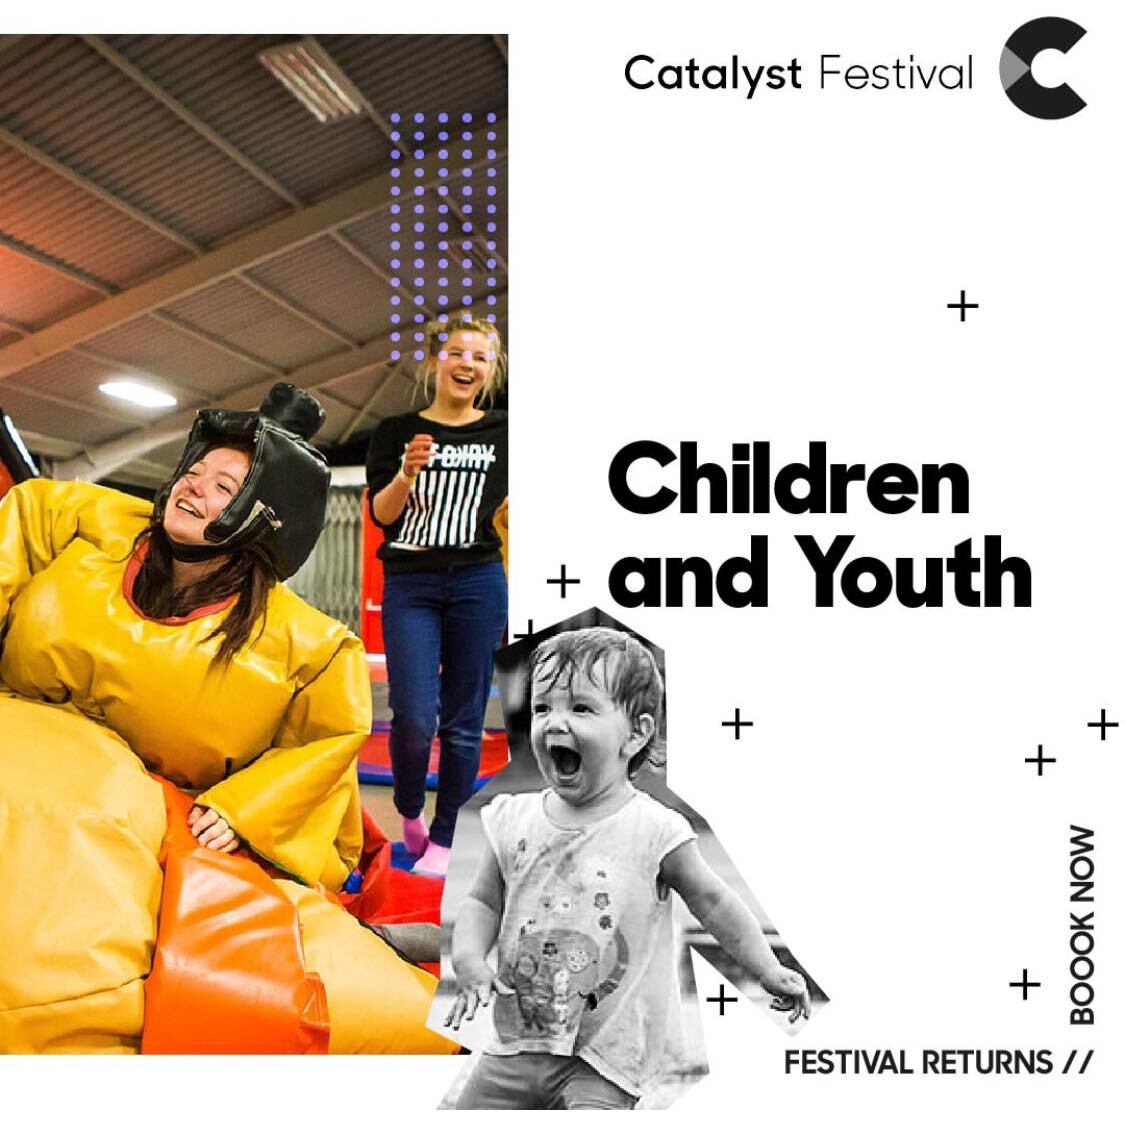 Bringing your family to Catalyst Festival? It&rsquo;s going to be a special experience for children and young attendees - a time for making friendships, engaging in worship and prayer, and plenty of fun!

Children up to 3-years go free! Then it&rsquo